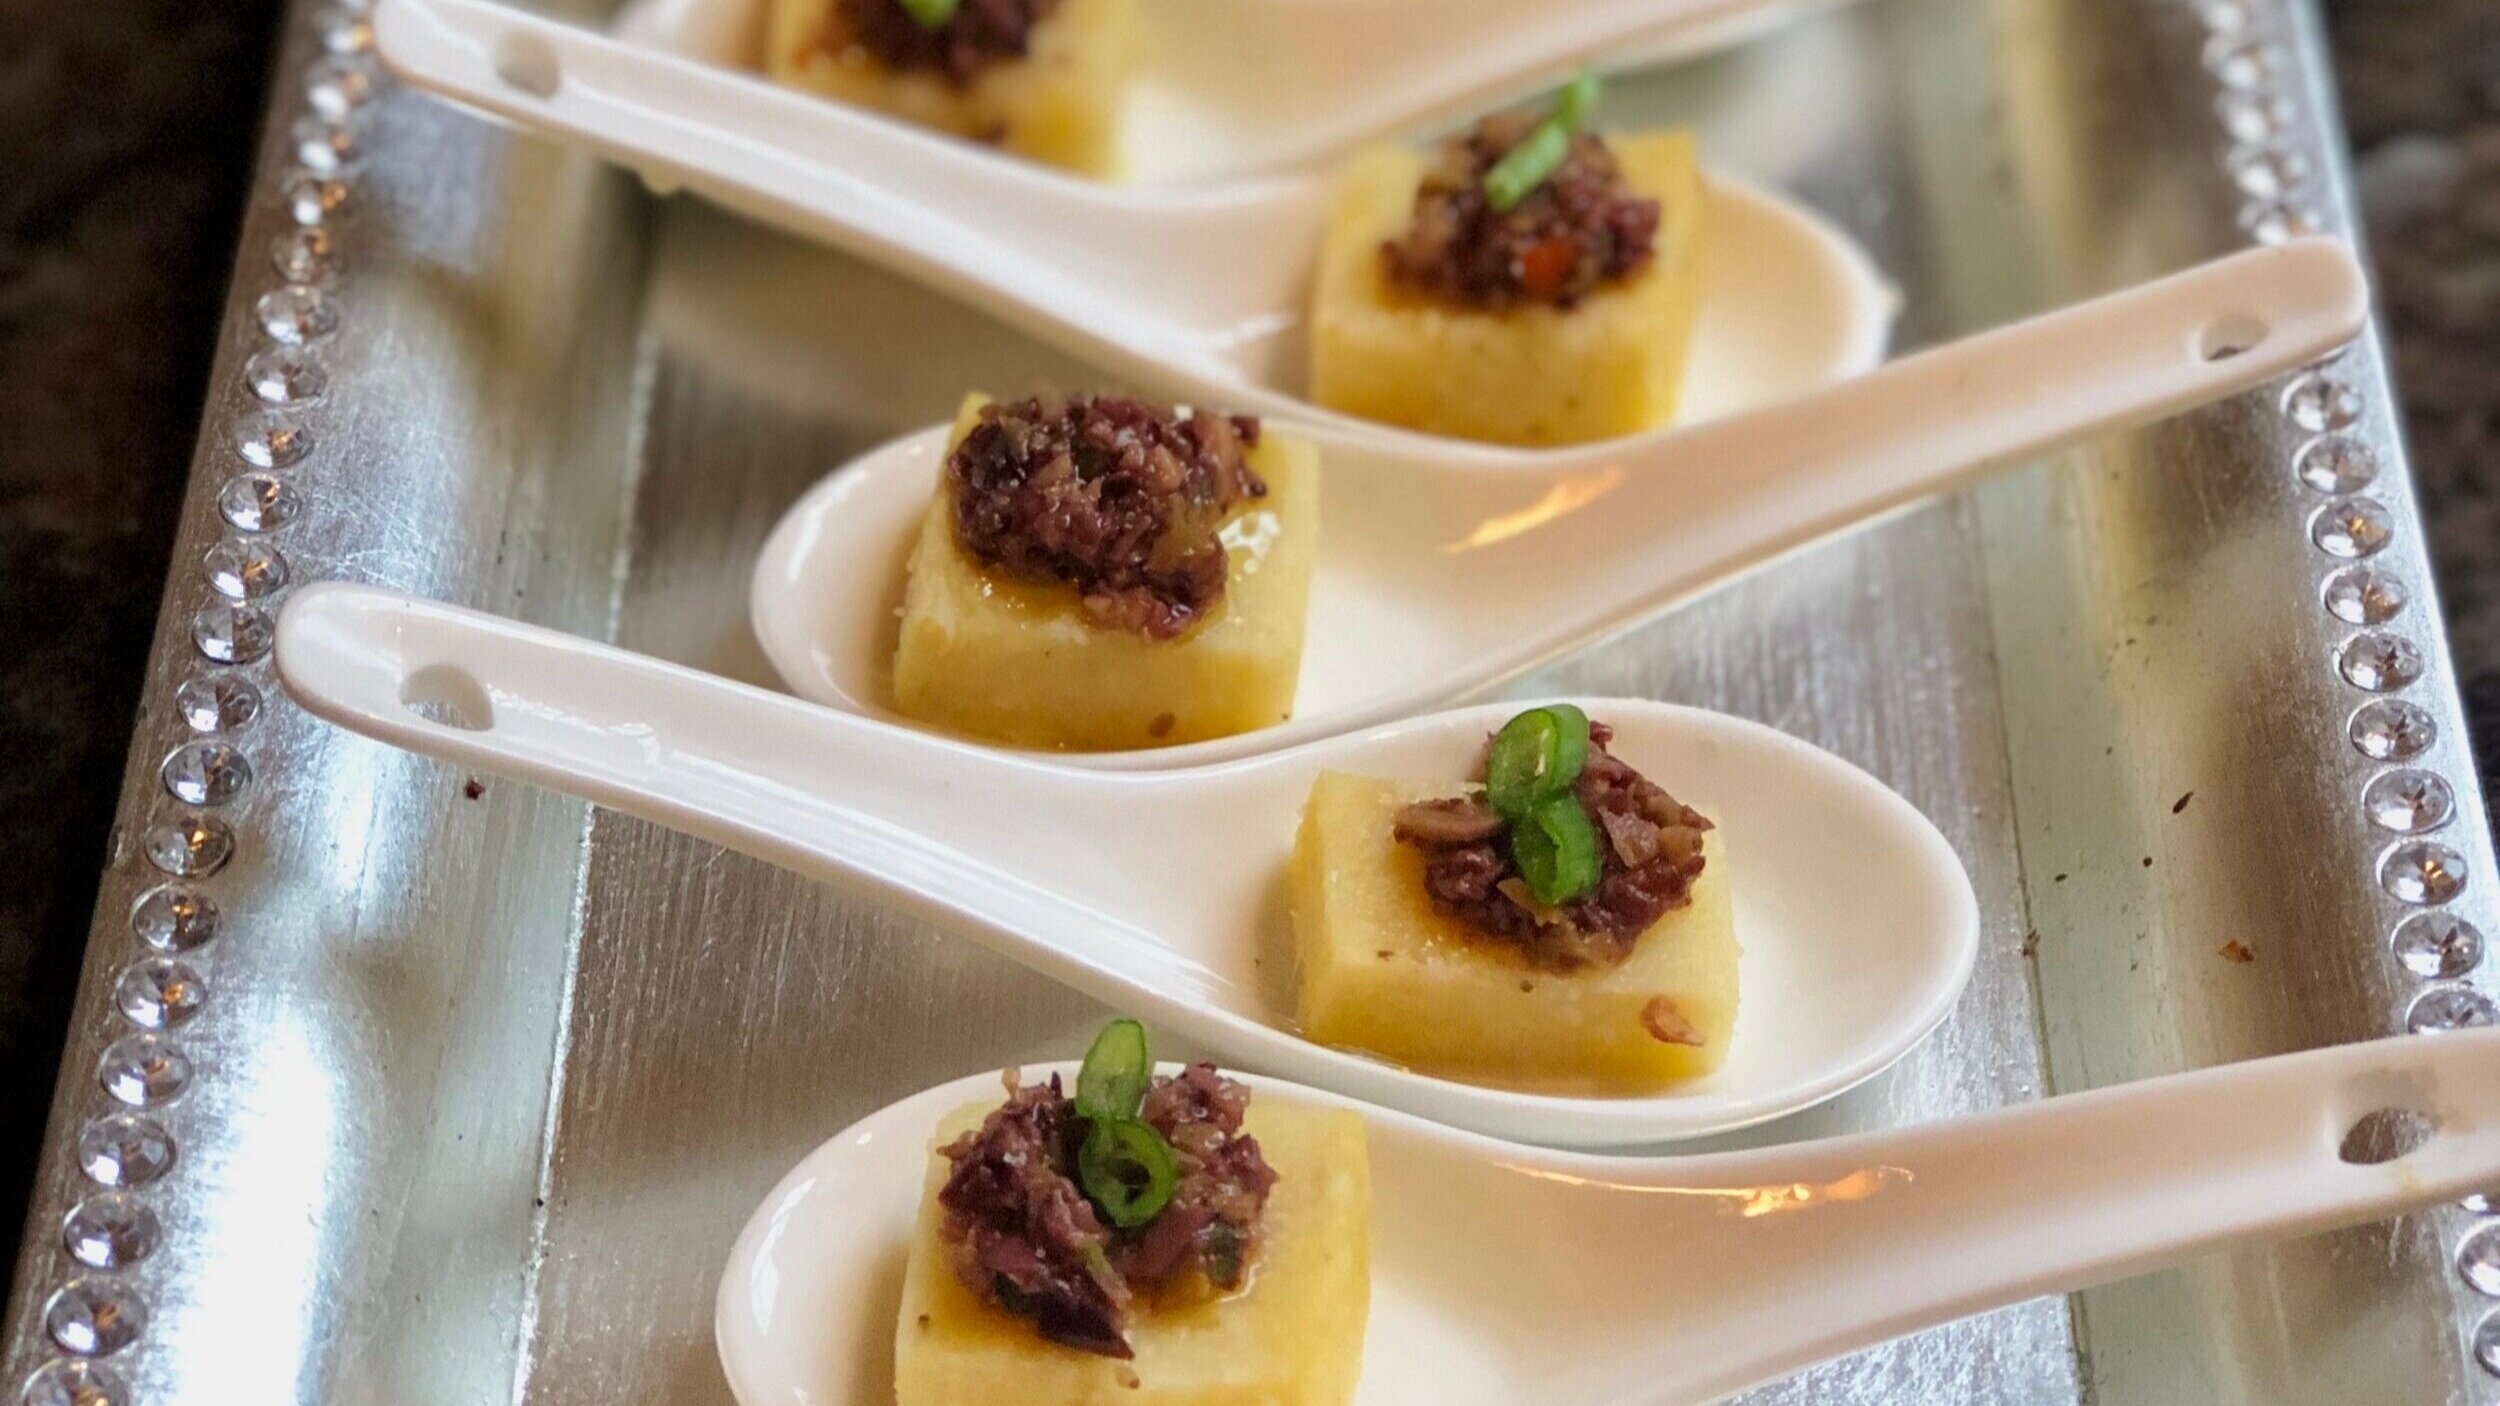 Savory Polenta Bites Topped with Olive Tapenade